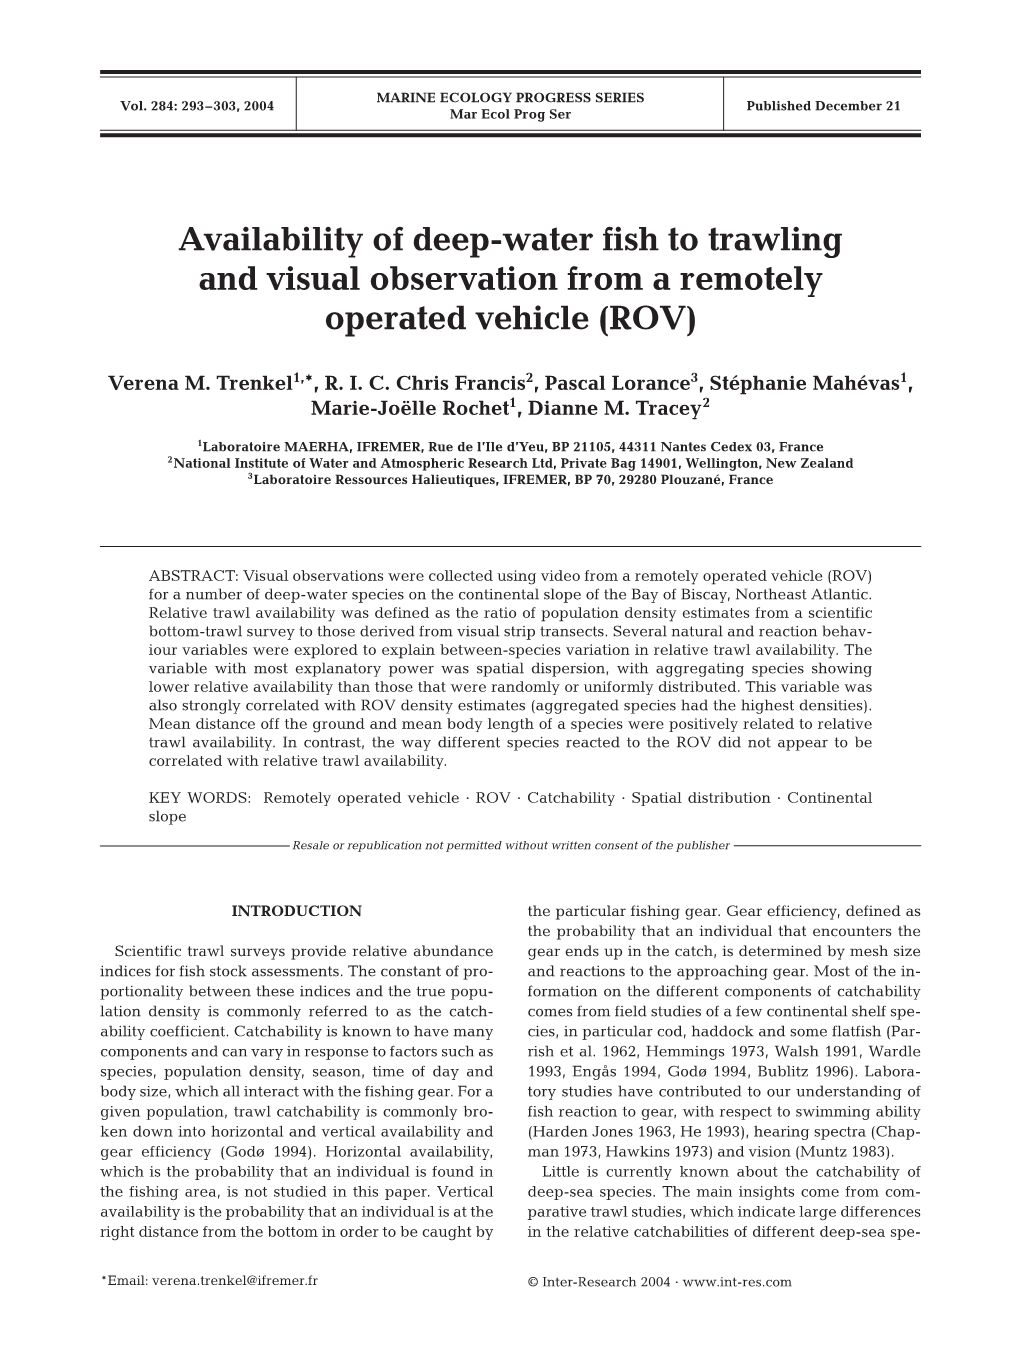 Availability of Deep-Water Fish to Trawling and Visual Observation from a Remotely Operated Vehicle (ROV)